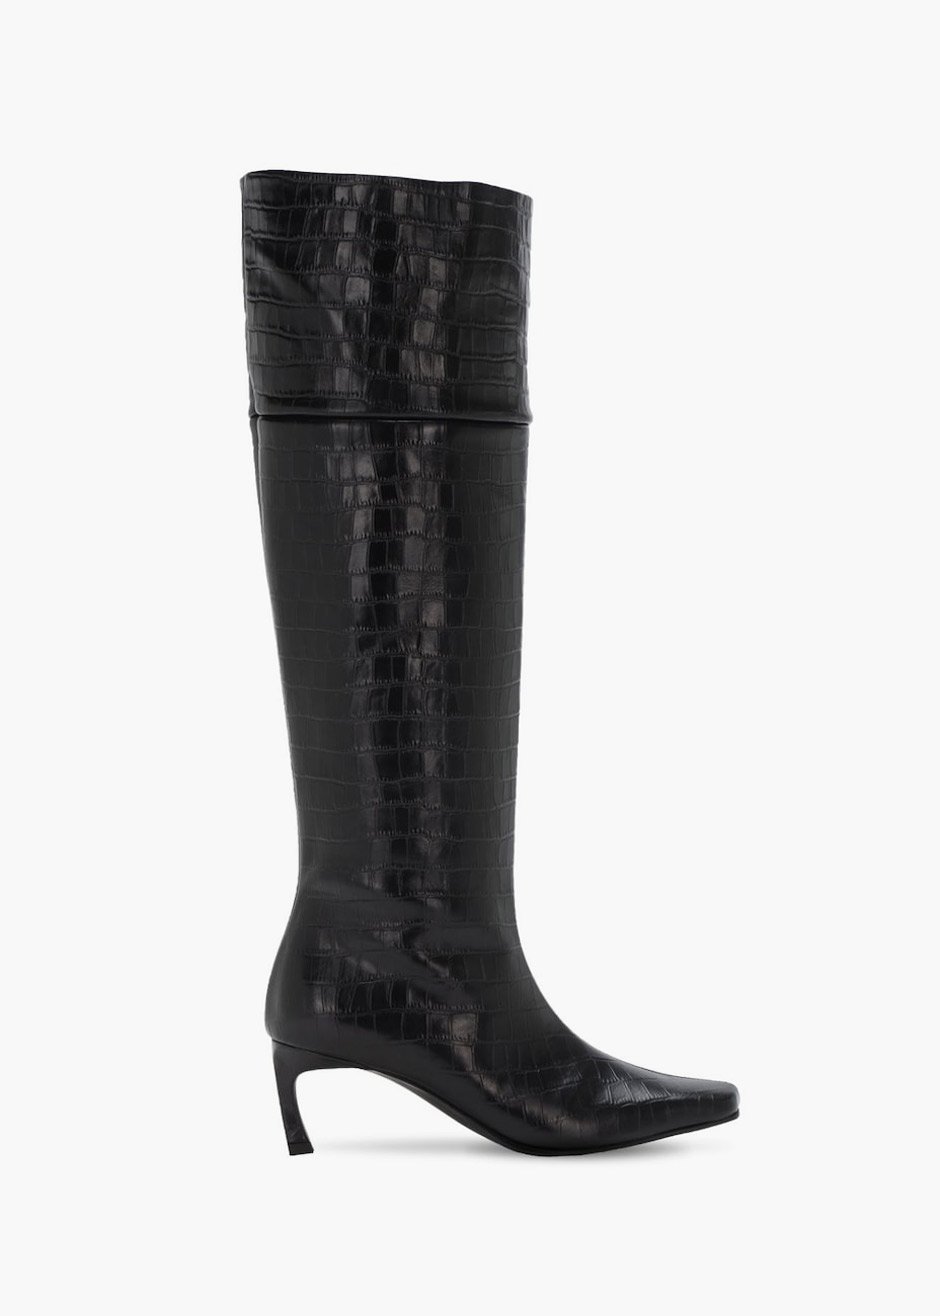 Reike Nen Embossed Leather Tall Boots - Black